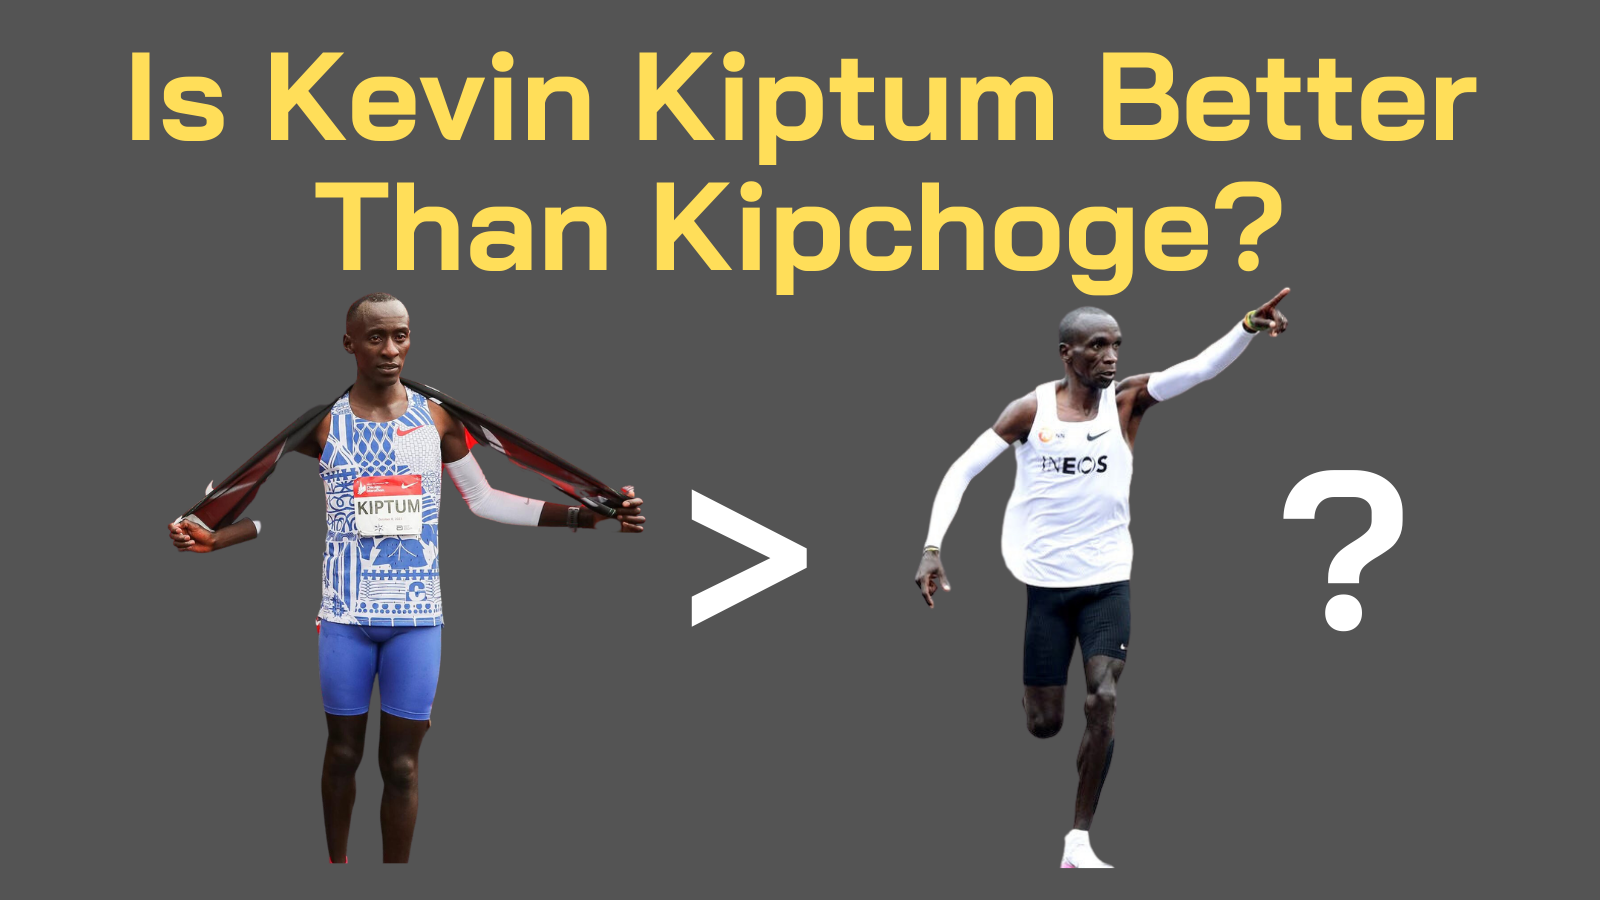 How Fast Is Eliud Kipchoge? This Treadmill Keeps His Pace - The New York  Times